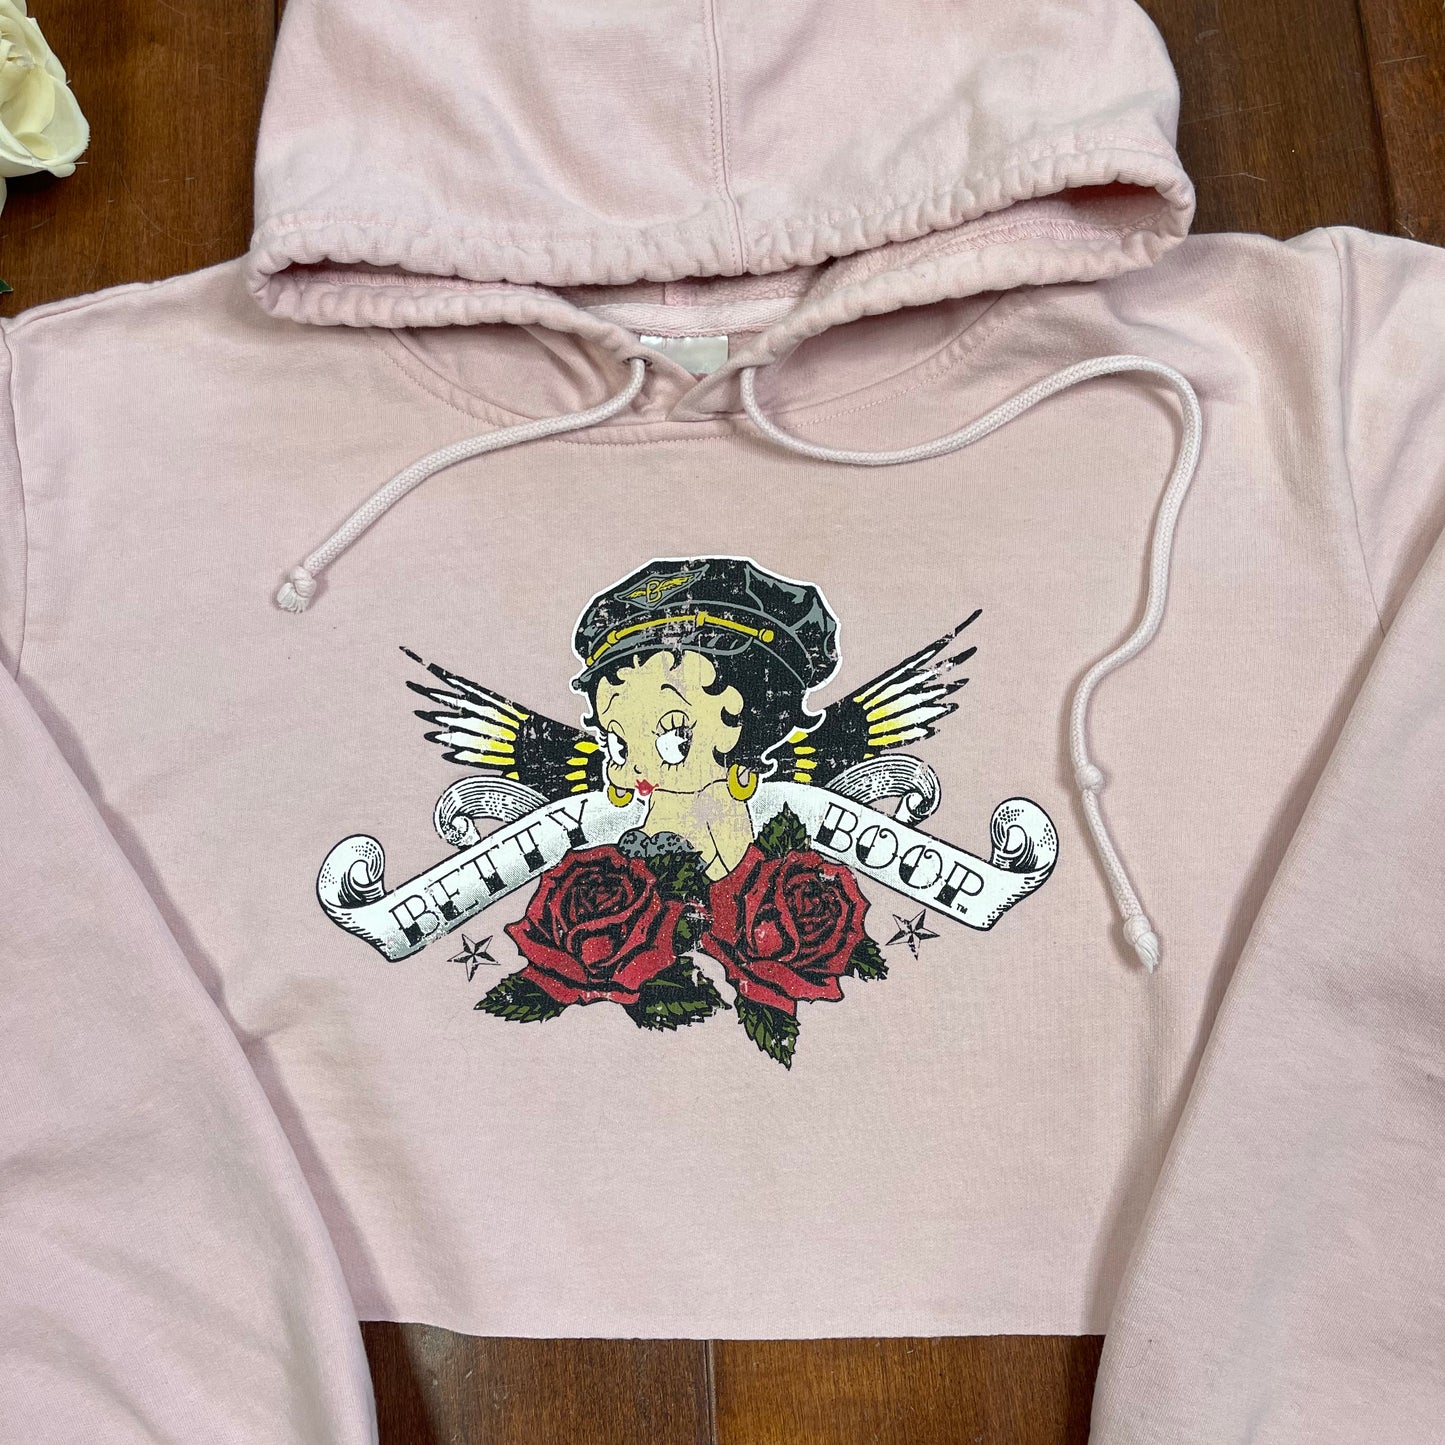 THRIFTED BETTY BOOP CROPPED HOODIE